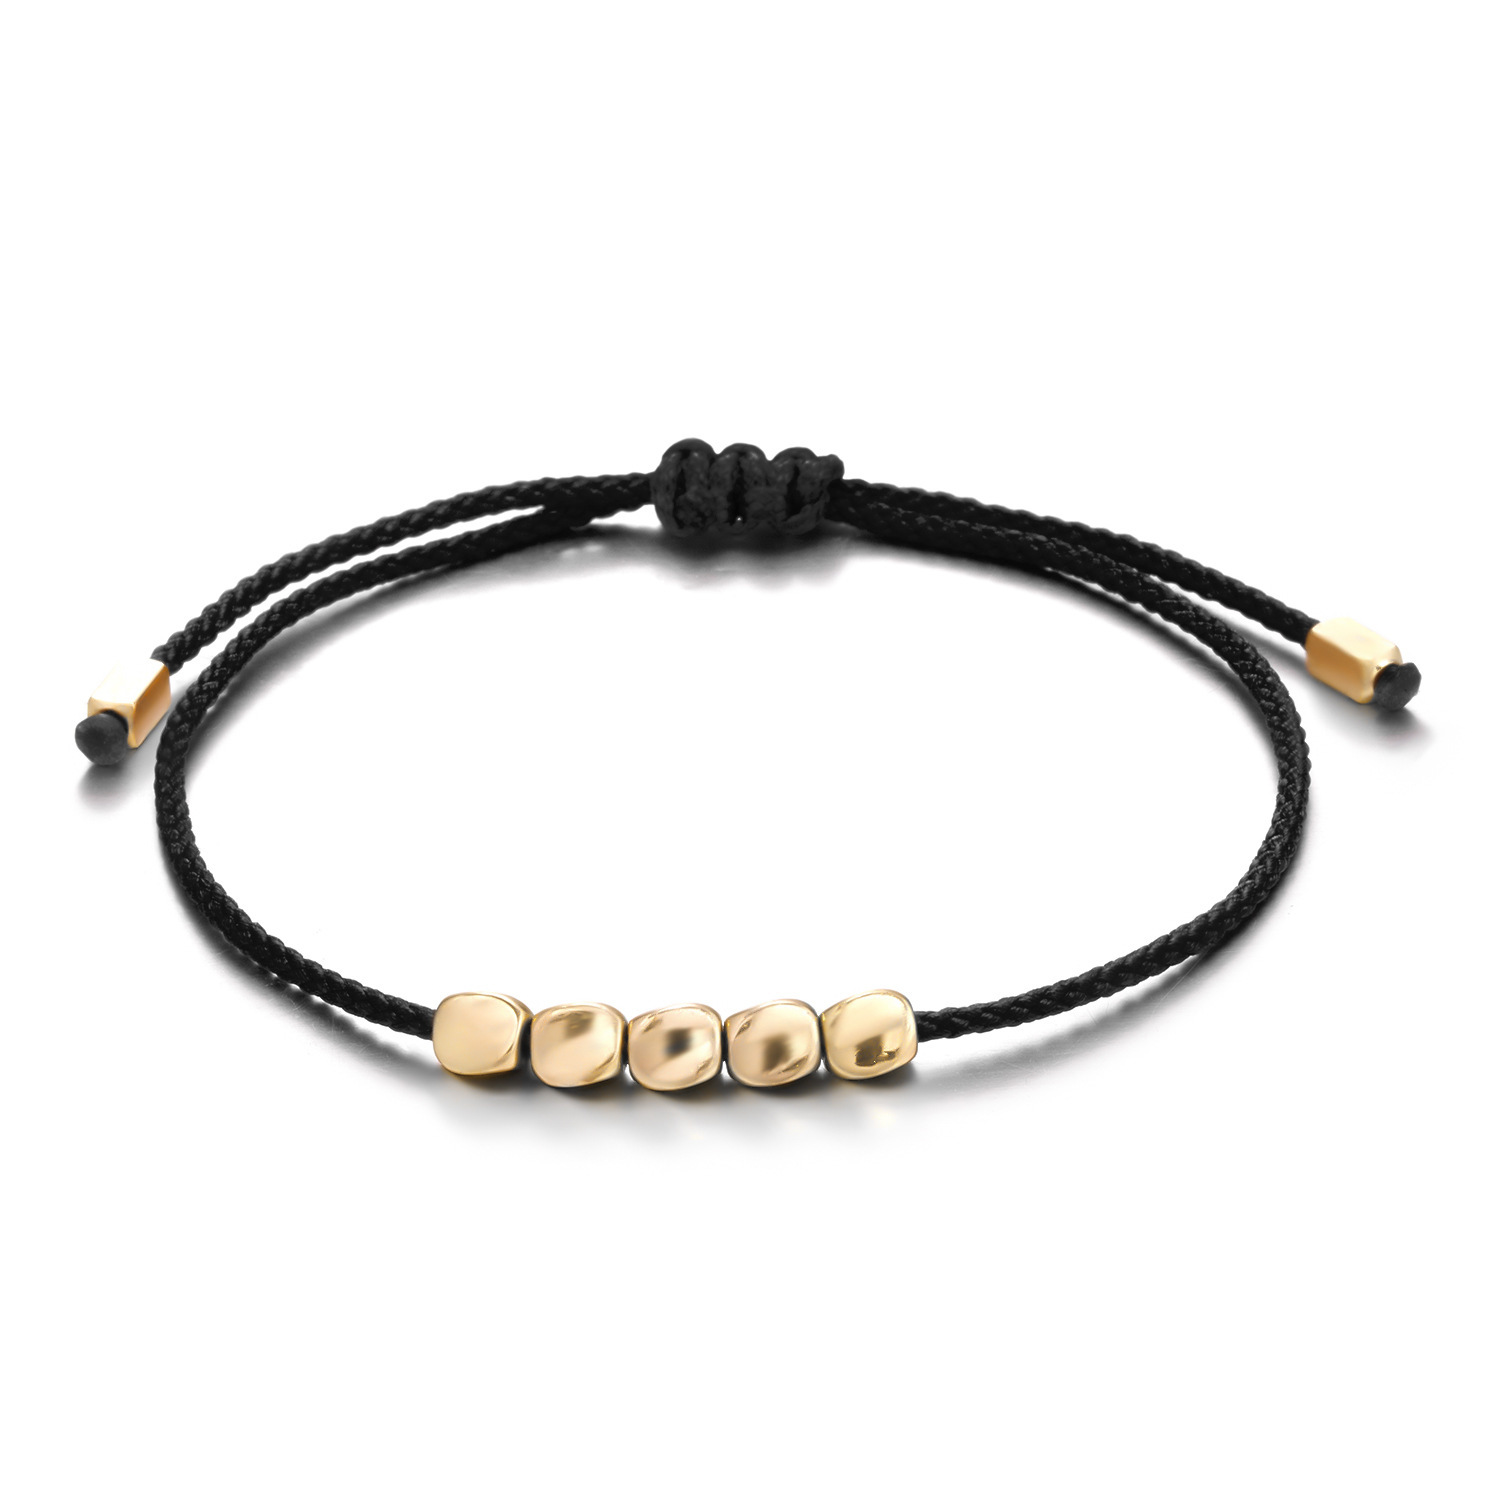 5 black strings with copper beads